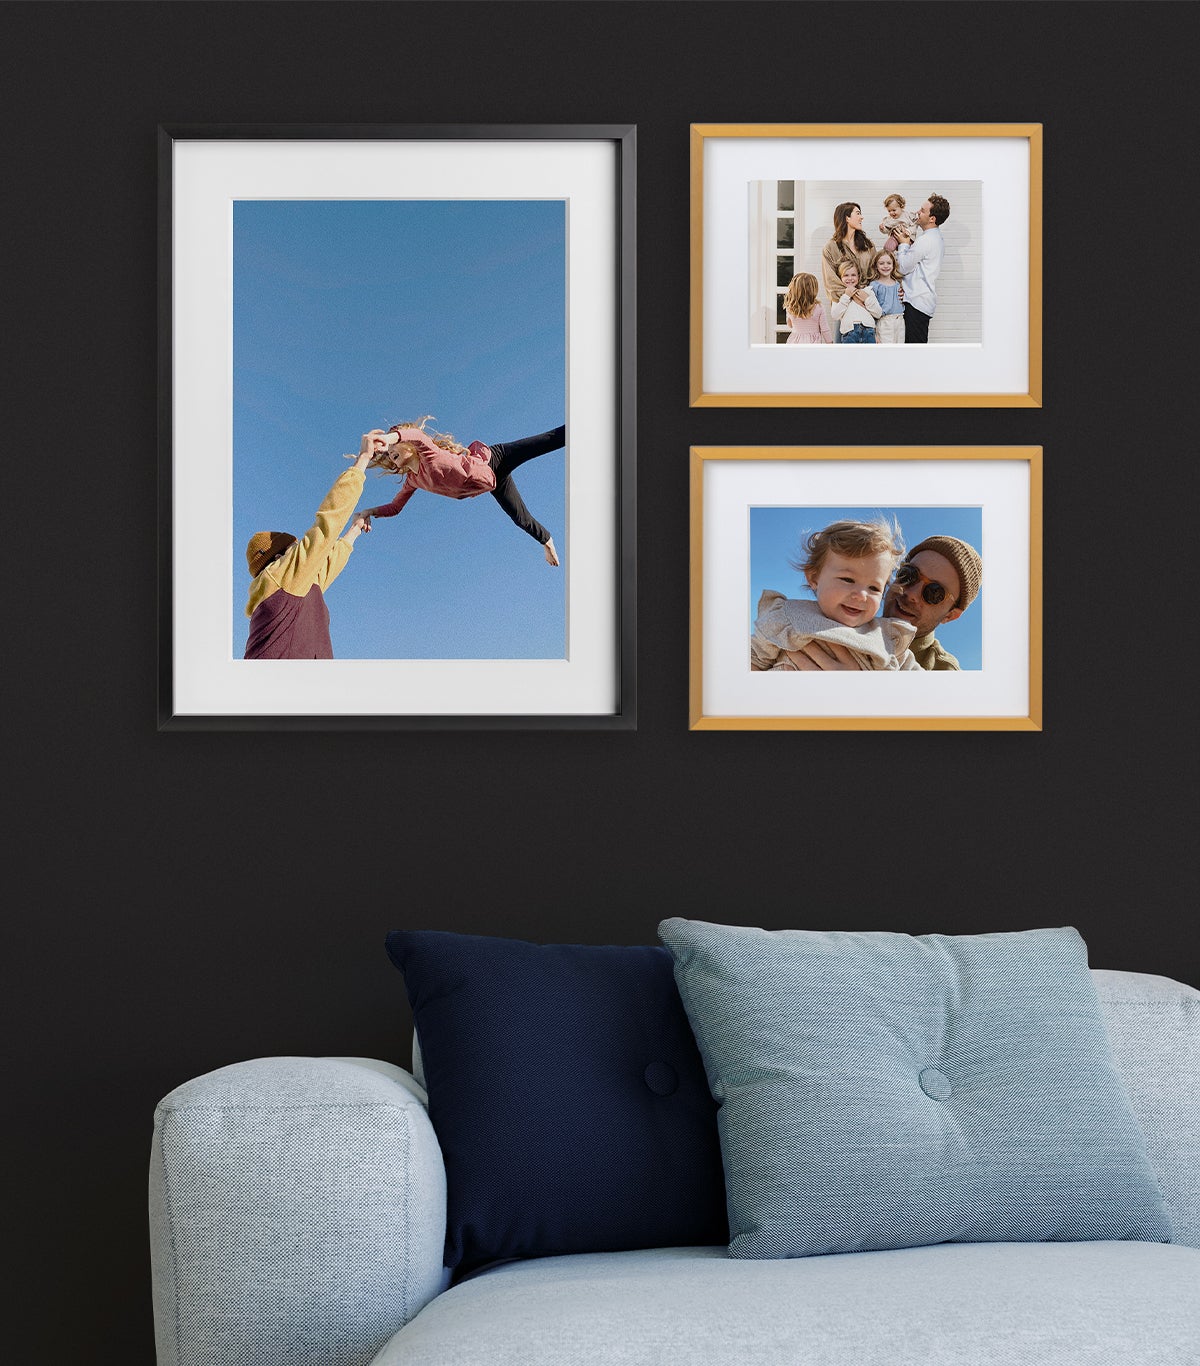 Artifact Uprising Modern Metal Frames featuring family photos arranged in small gallery wall above blue couch